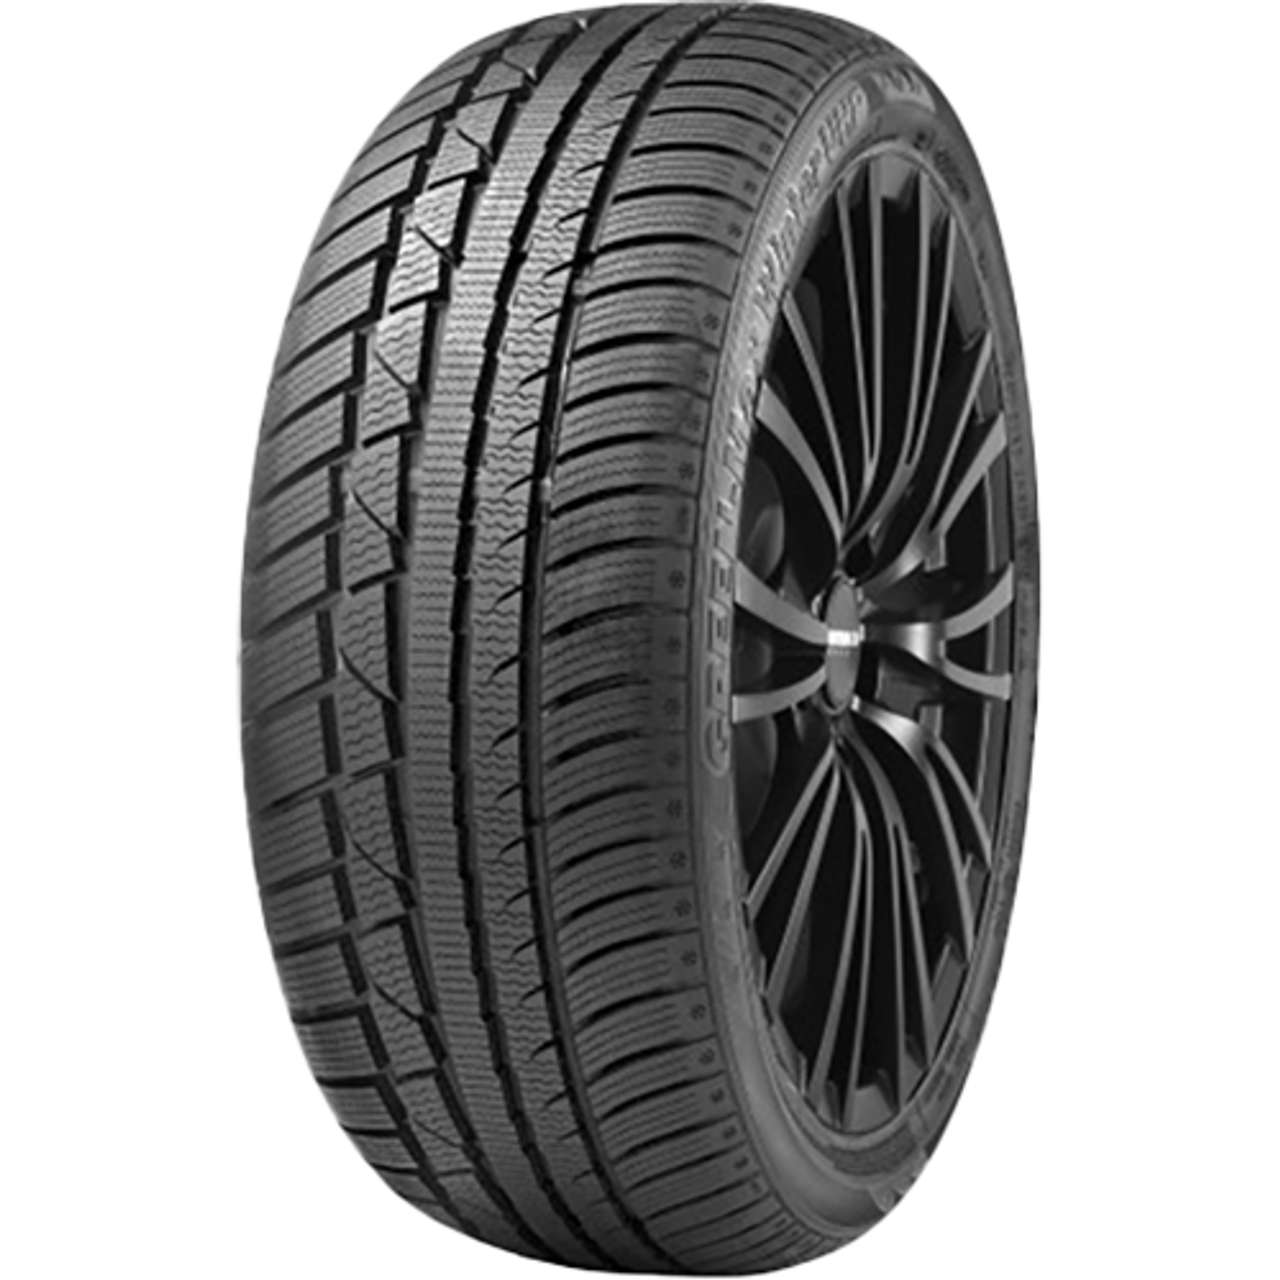 LINGLONG GREEN-MAX WINTER UHP 225/45R17 94V MFS BSW von LINGLONG